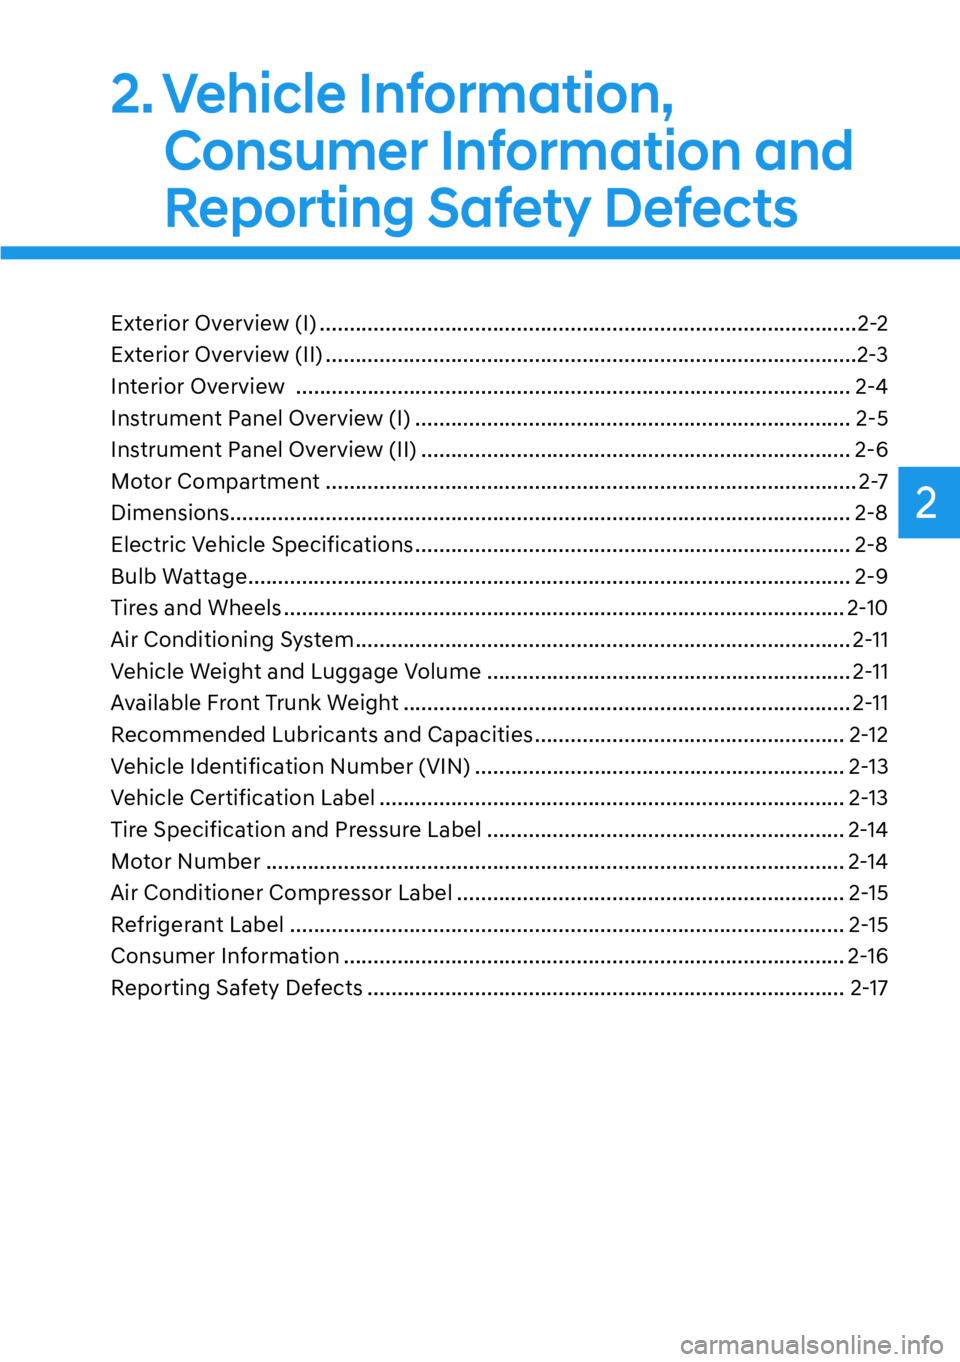 HYUNDAI IONIQ 5 2022  Owners Manual 2
2. Vehicle  Information, 
Consumer Information and 
Reporting Safety Defects
Exterior Overview (I) ..........................................................................................2-2
Exter